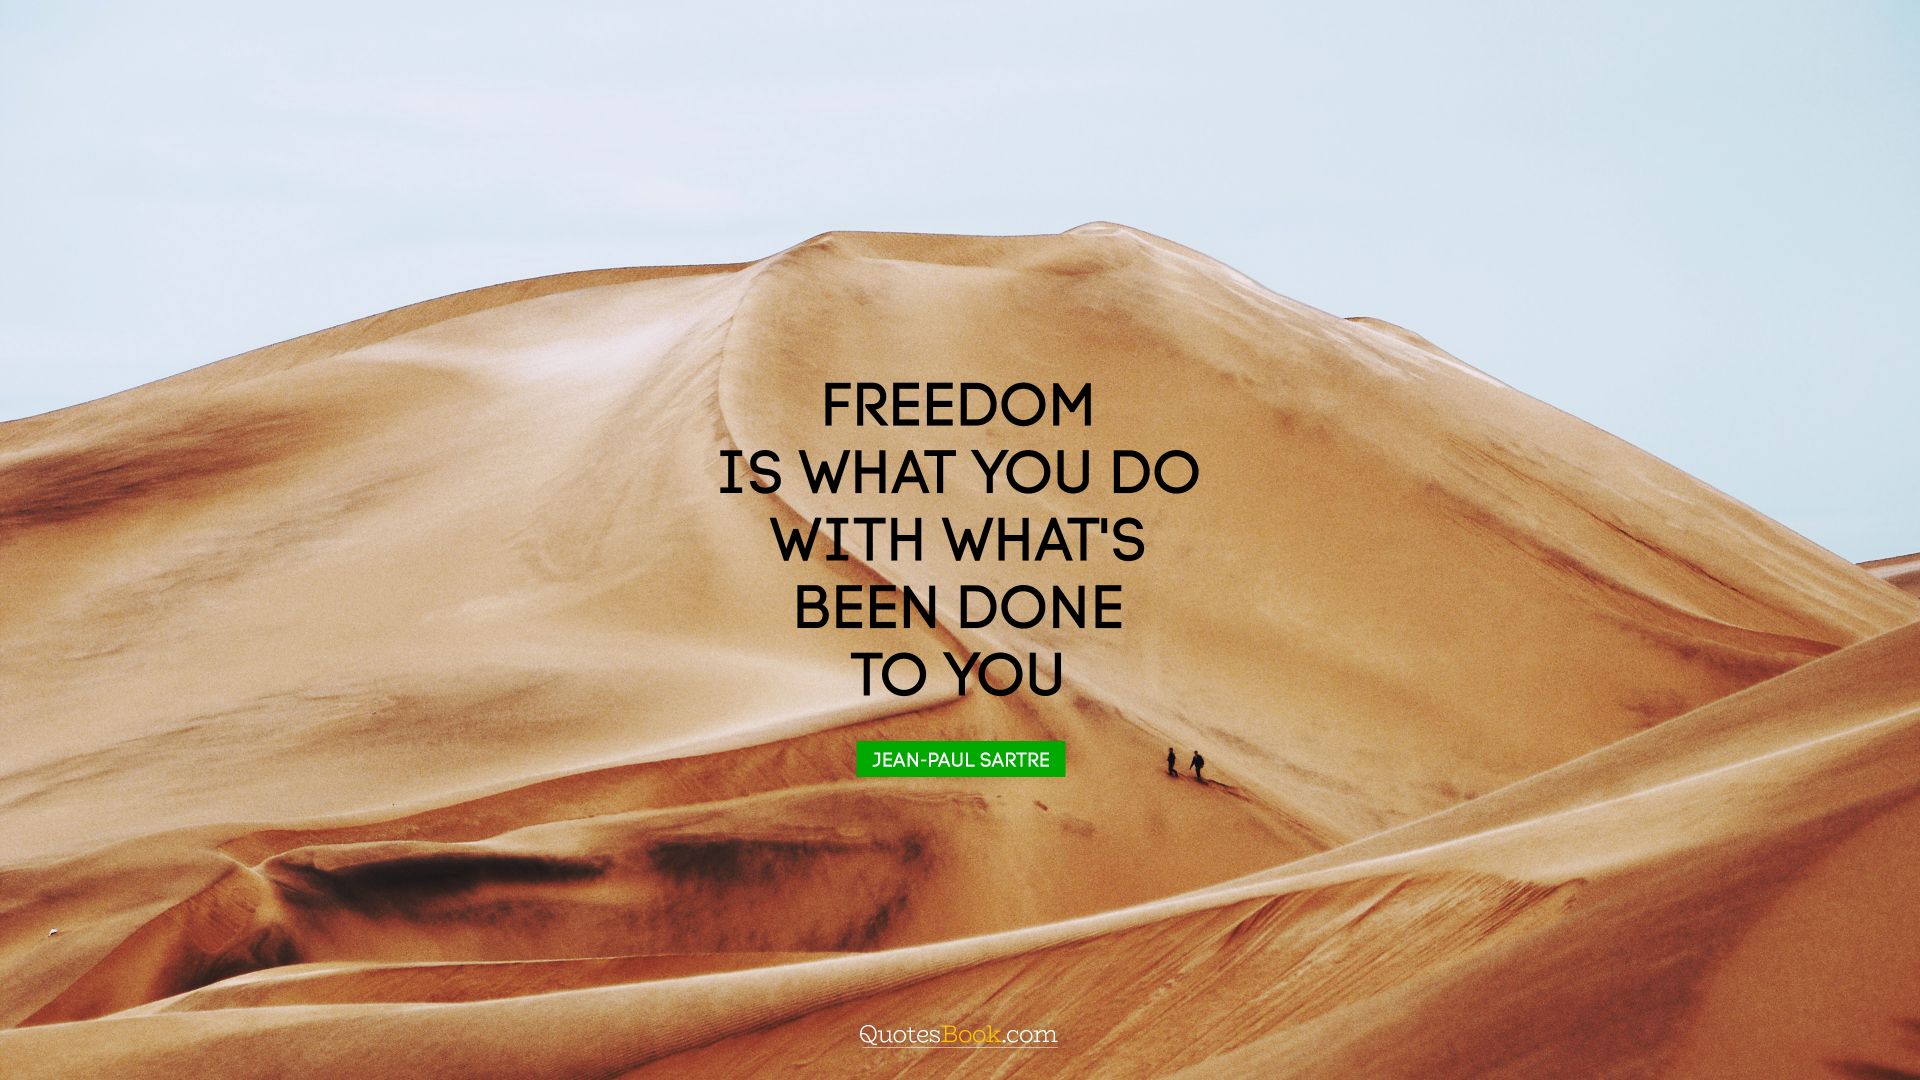 Freedom is what you do with what's been done to you. - Quote by Jean-Paul Sartre